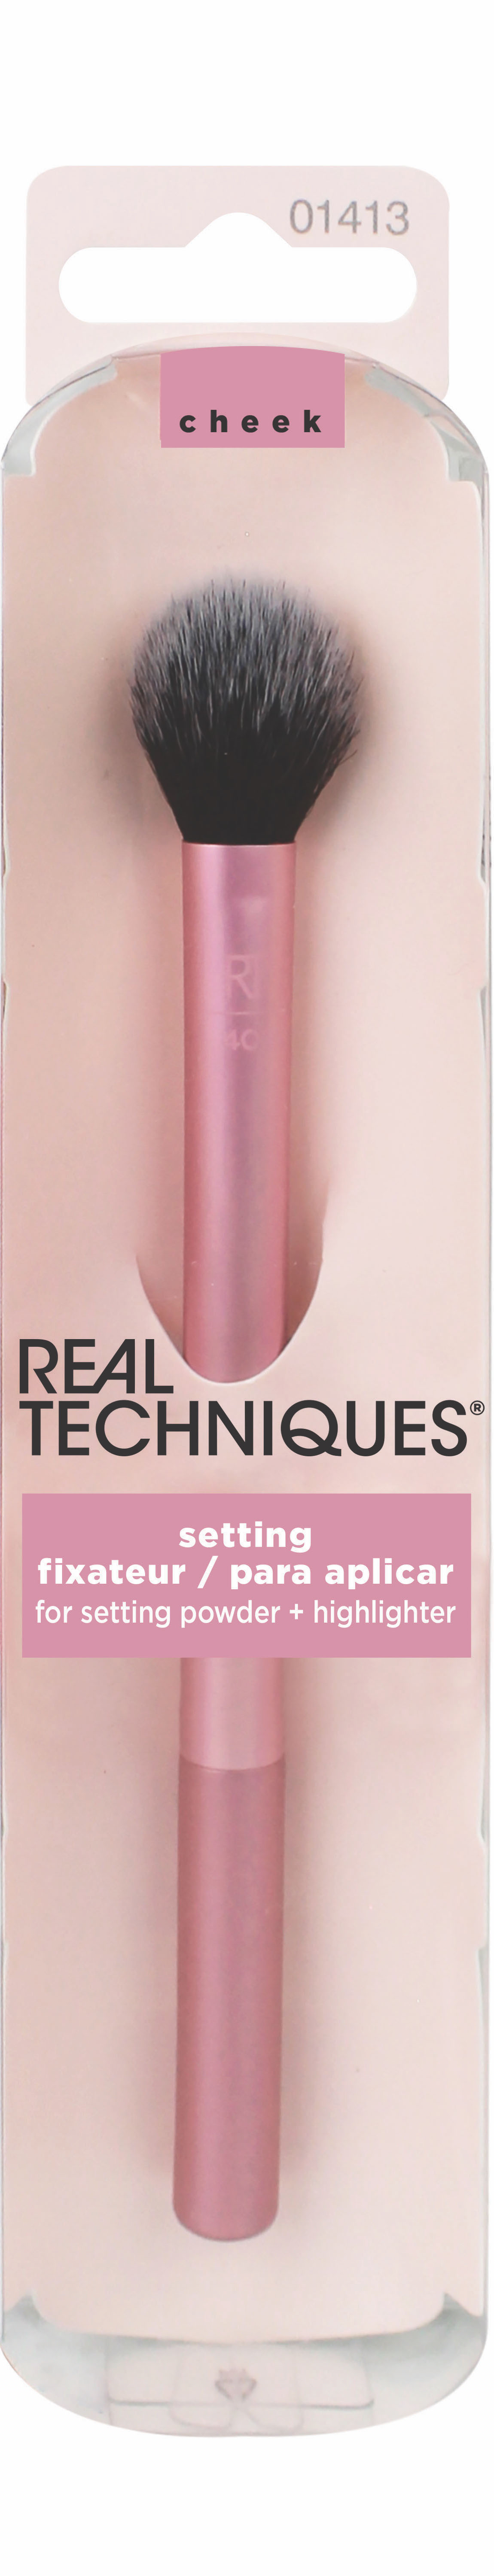 Real Techniques Everyday Essentials Set Review - New Look Brushes